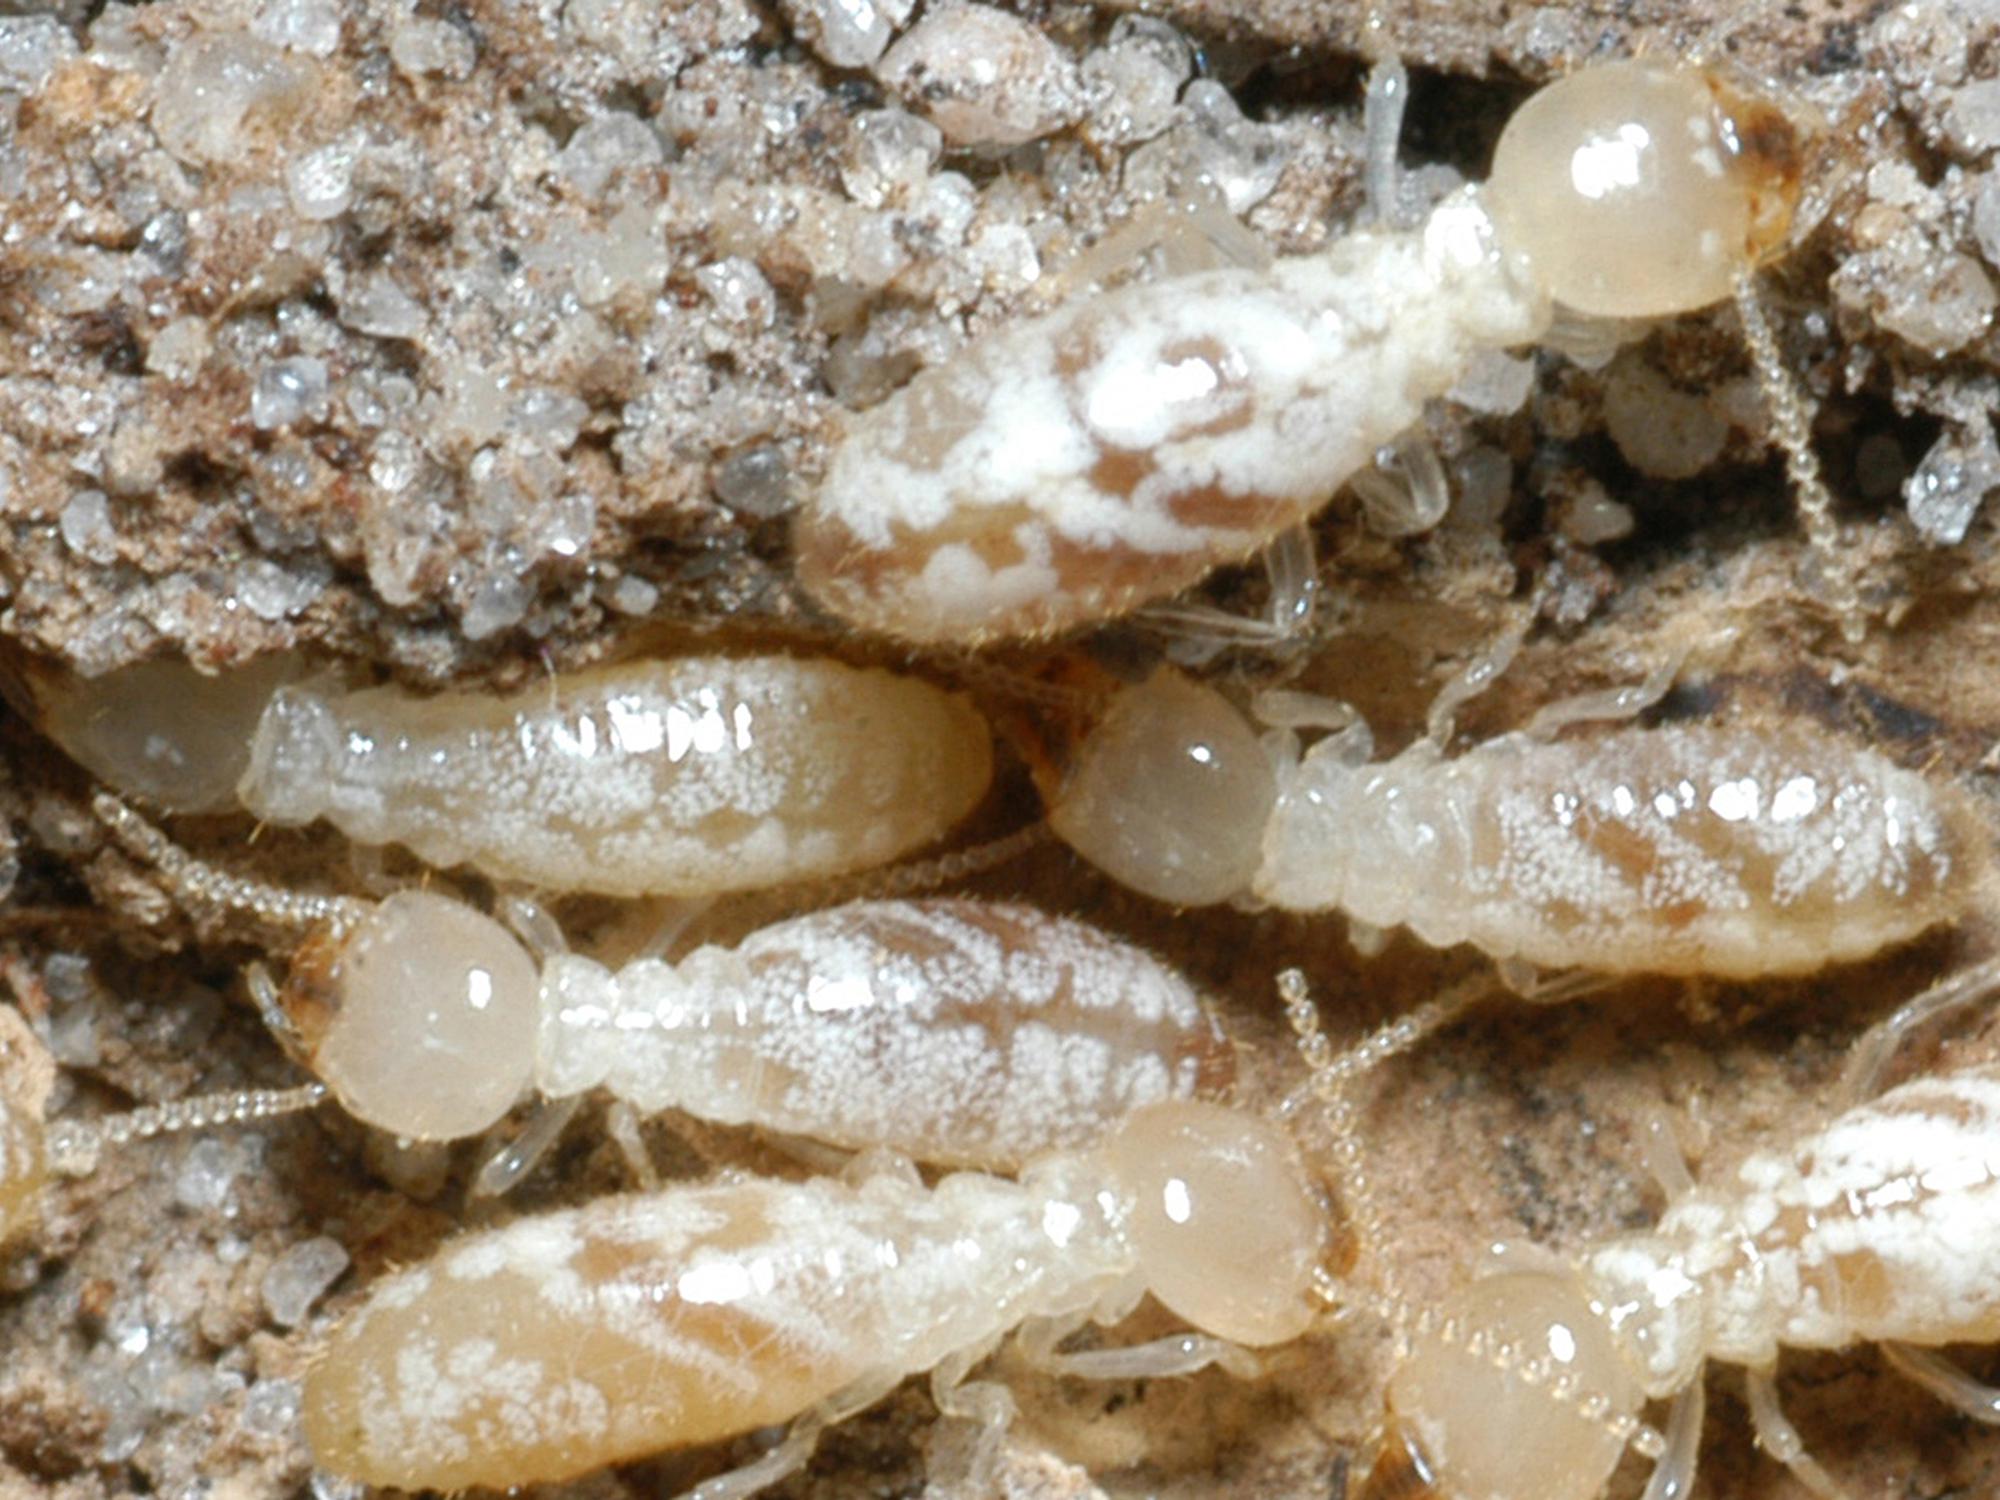 Termites swarm when they are looking for new places to begin colonies. Left uncontrolled, these pests can cause extensive damage to houses and other buildings. (Photo by MSU Extension Service/Blake Layton)